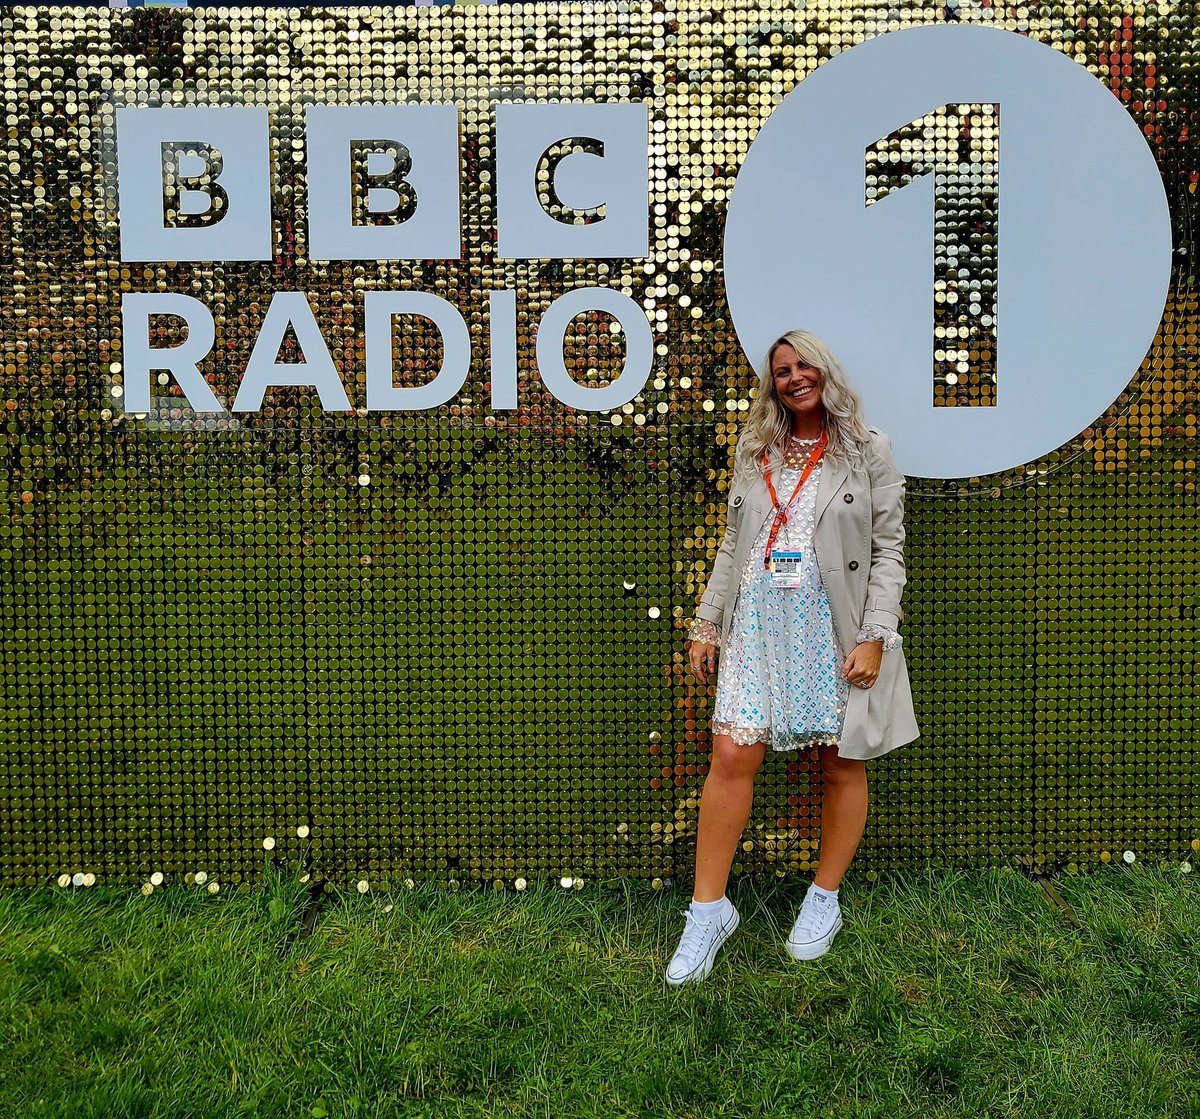 Righhhhhhht the DAY RAVE is on!!!!! 3 hours of Classics instead of 2 today from 4pm, Dance Anthems is the official pre party to the Platinum Jubilee party later....so let's have a good one all of us ❤️ @BBCR1 @BBCSounds